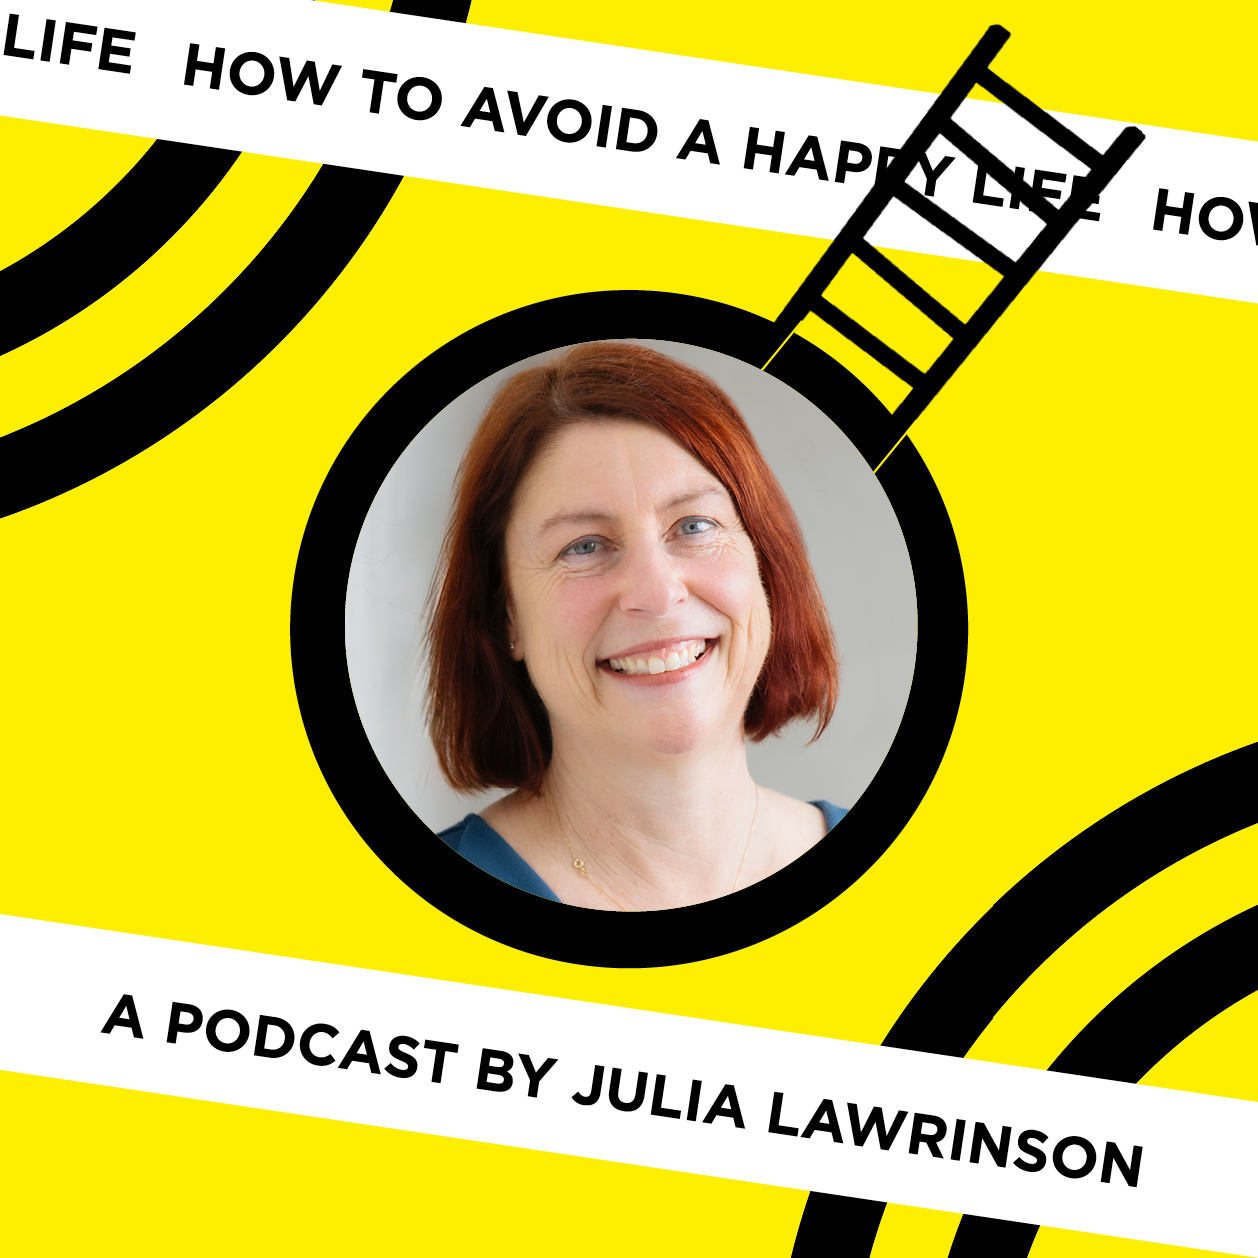 How to Avoid a Happy Life podcast episode 1: Author Julia Lawrinson traces her family lineage to reveal generational truths about divorce